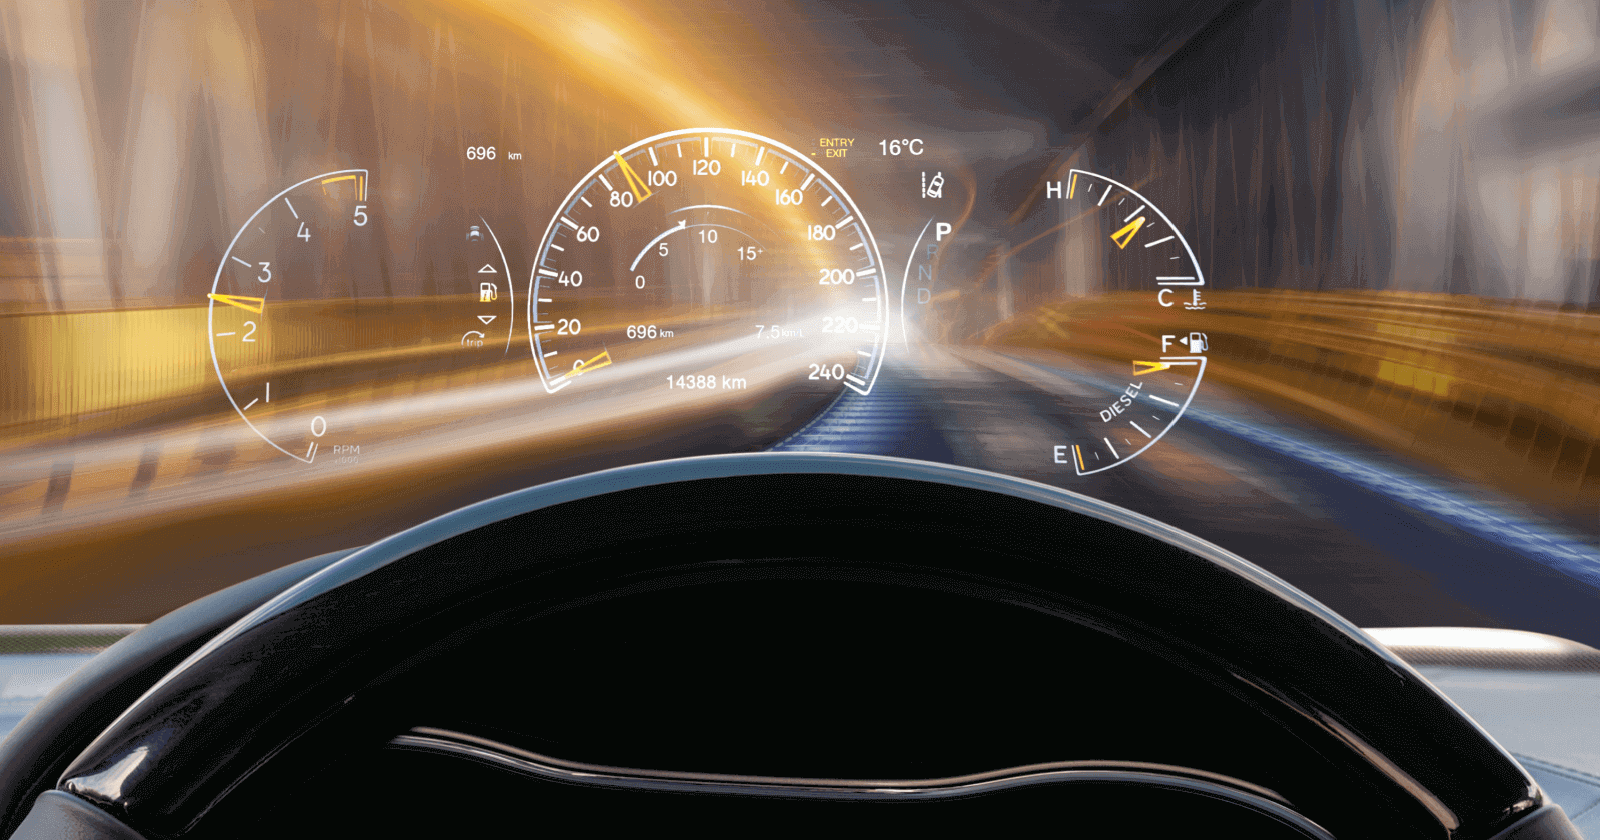 The Complete Guide to Head-up Displays (HUDs) in Cars